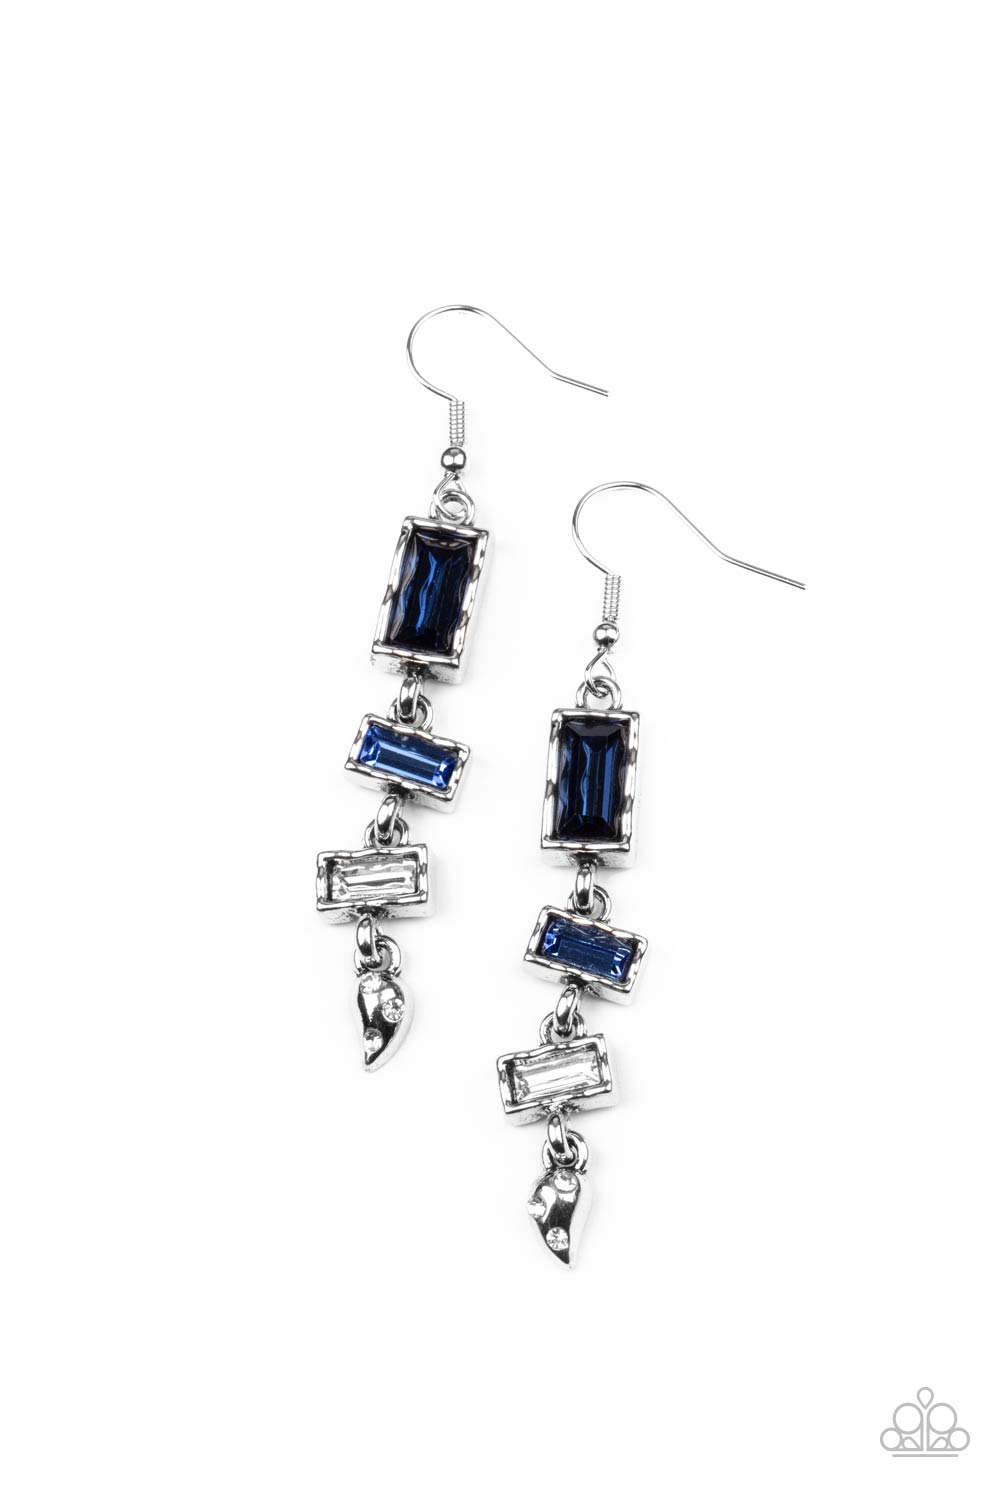 Modern Day Artifact Blue and White Rhinestone Earrings - Paparazzi Accessories- lightbox - CarasShop.com - $5 Jewelry by Cara Jewels